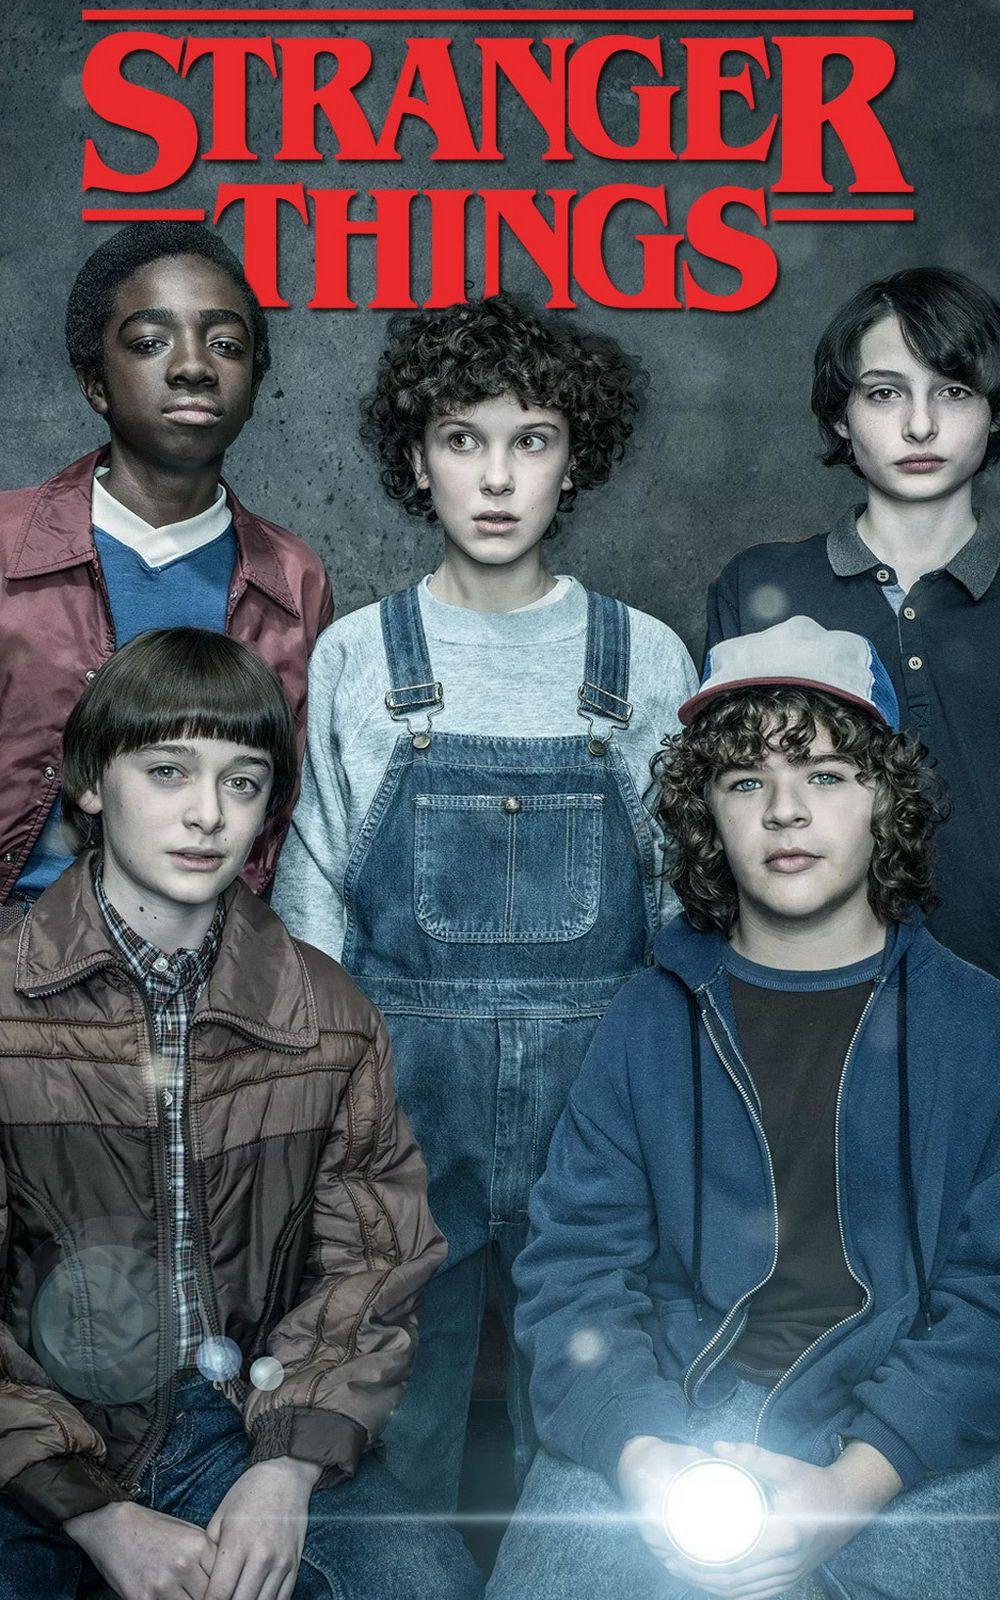 Buy Stranger Things Upside Down Iphone  Android Phone Wallpaper Online in  India  Etsy